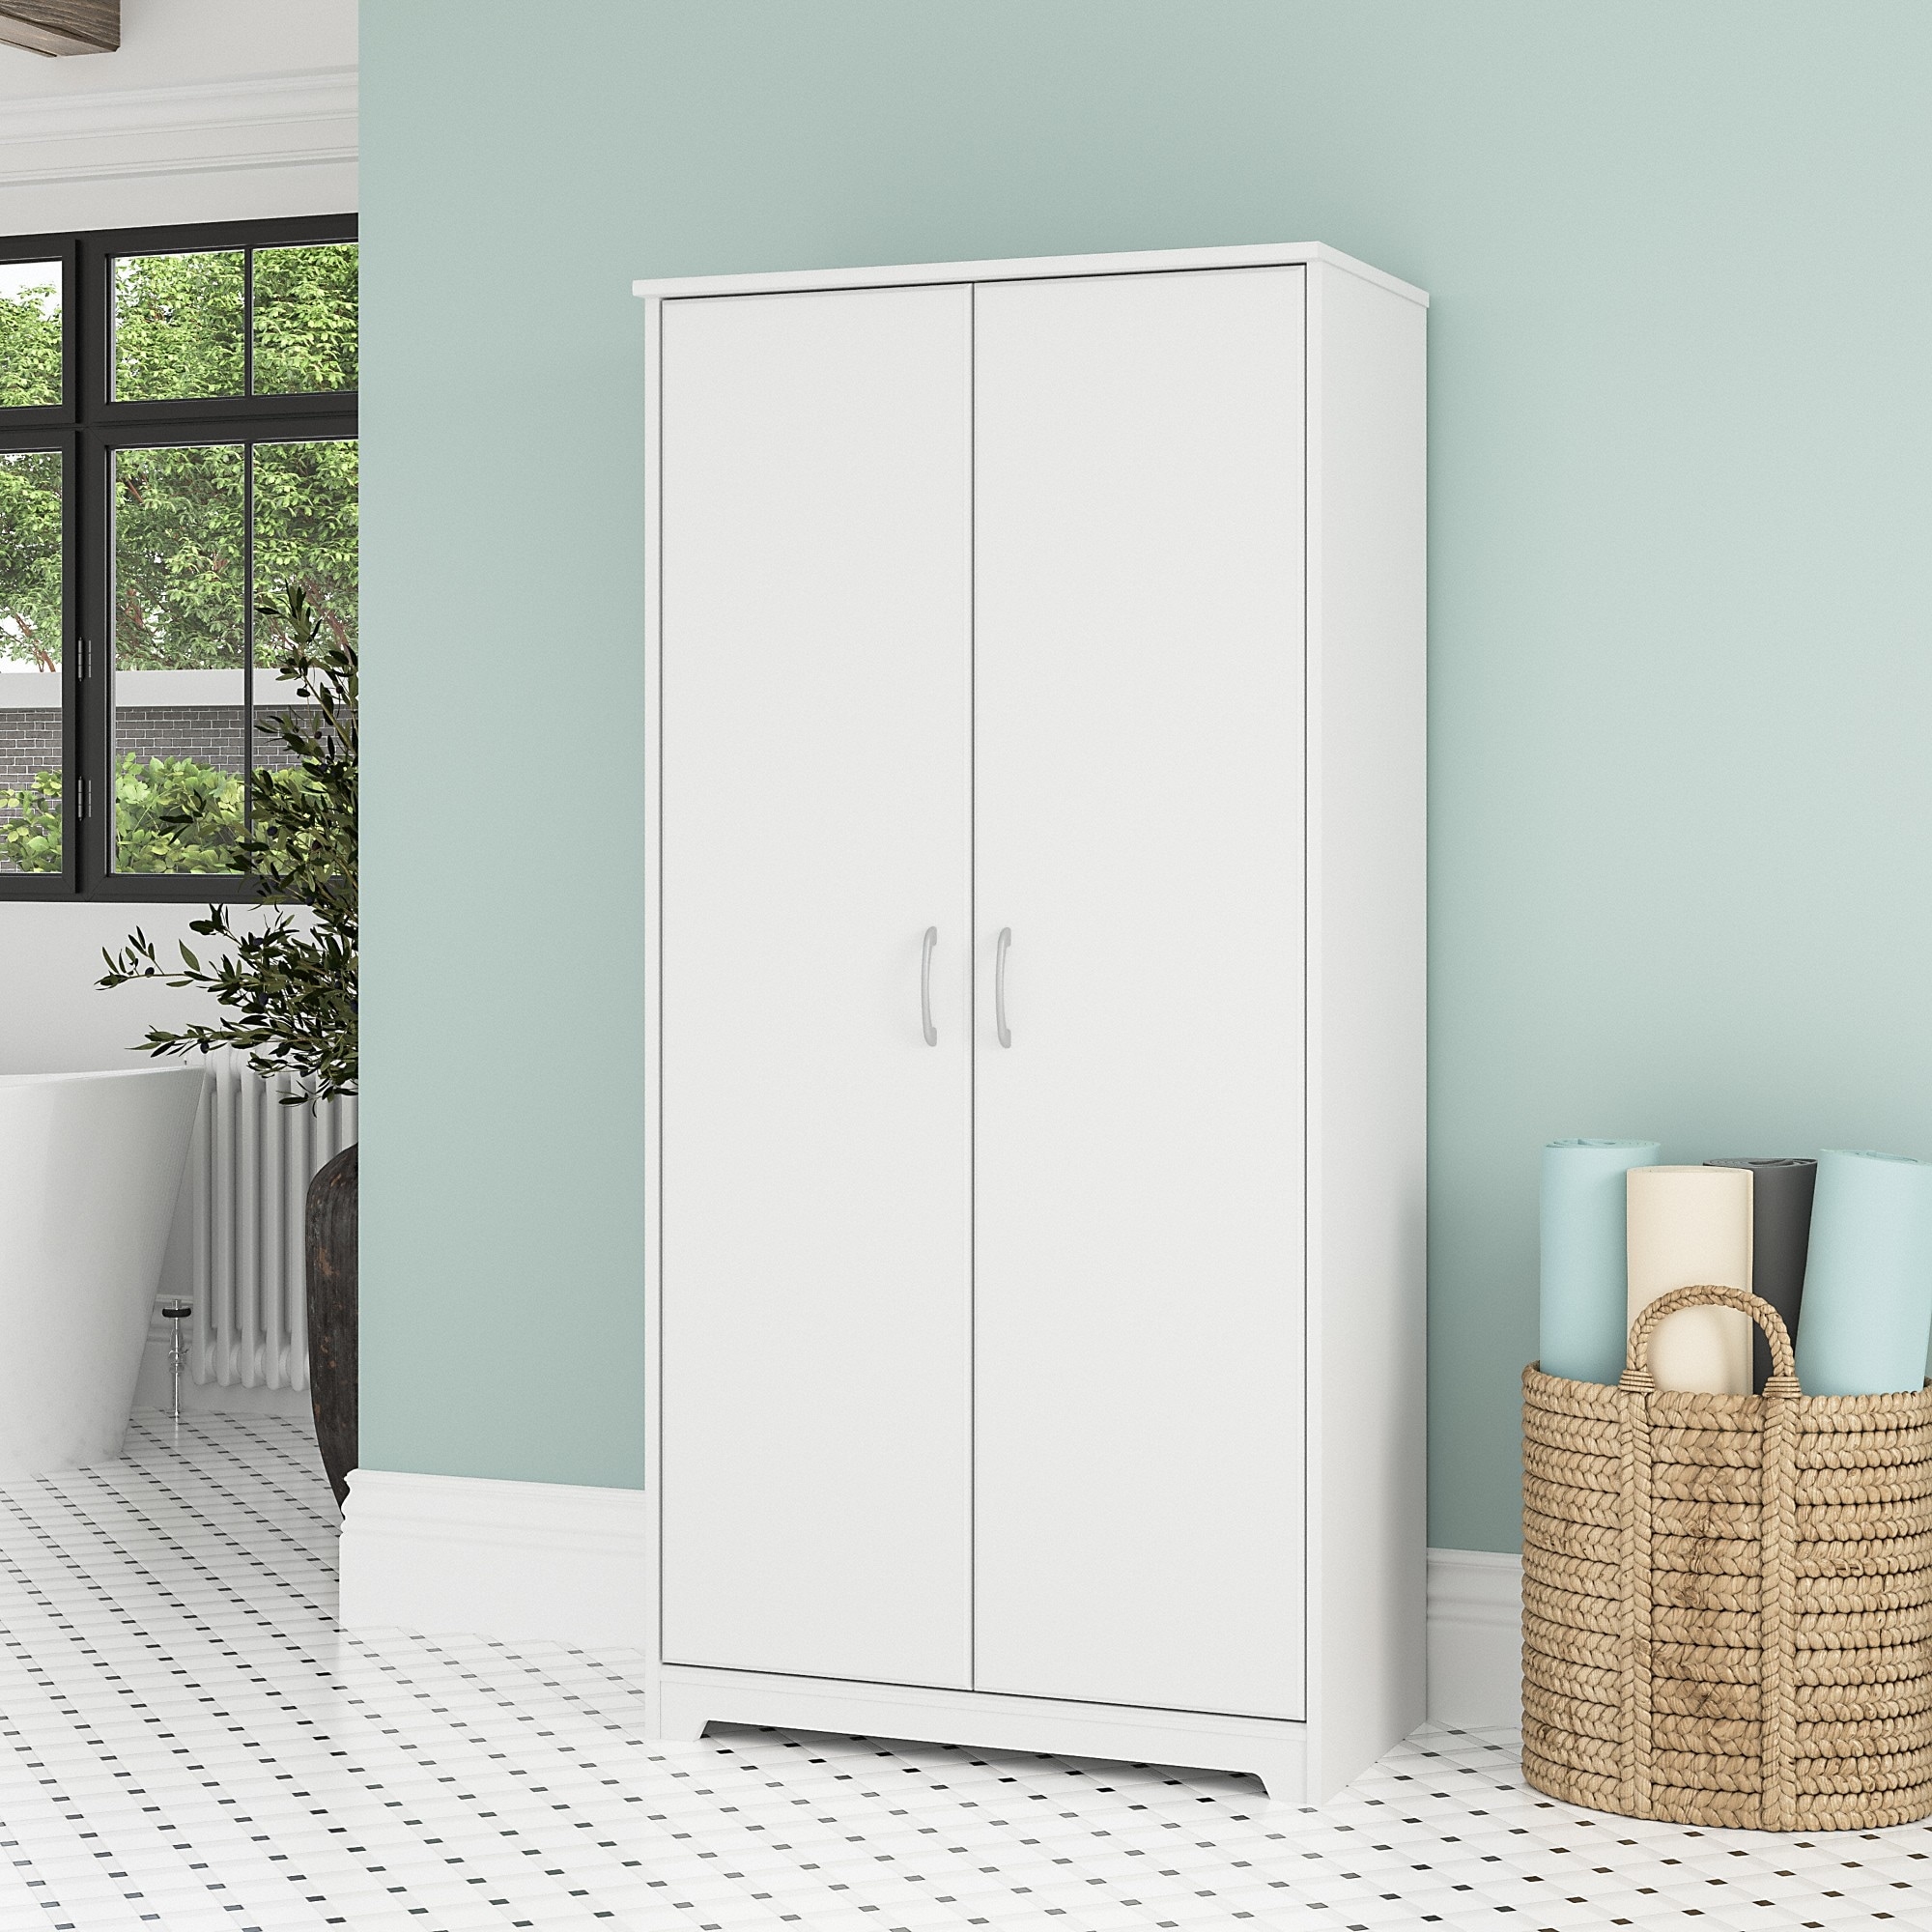 Bush Cabot Small Bathroom Storage Cabinet with Doors in Ash Gray